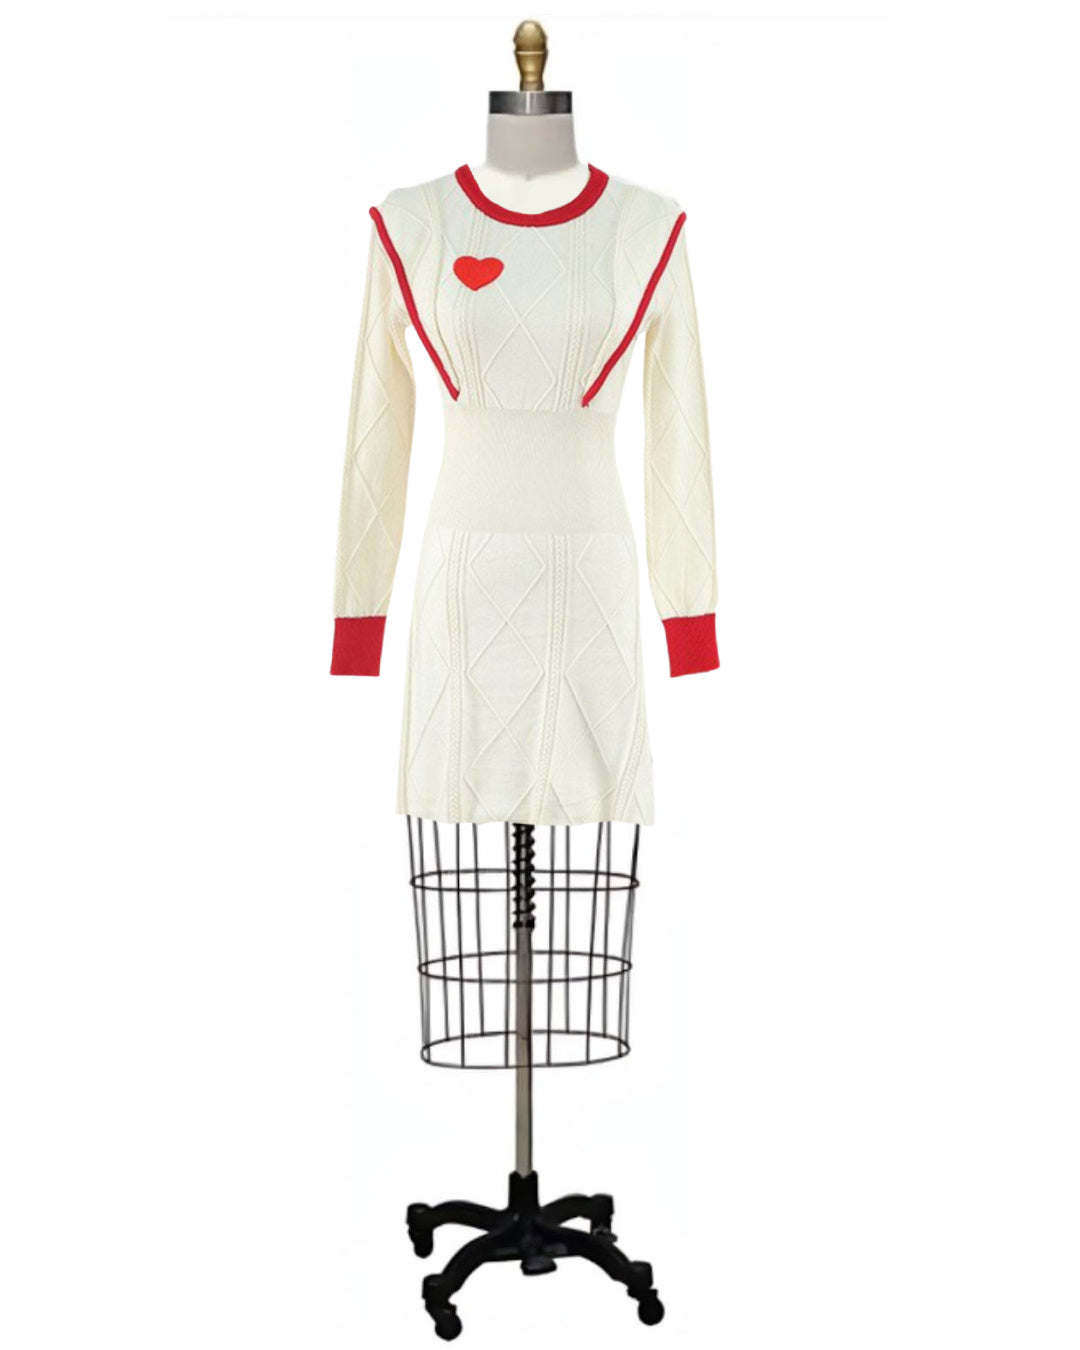 Fenced- the Fencing Style Heart Design Sweater Dress